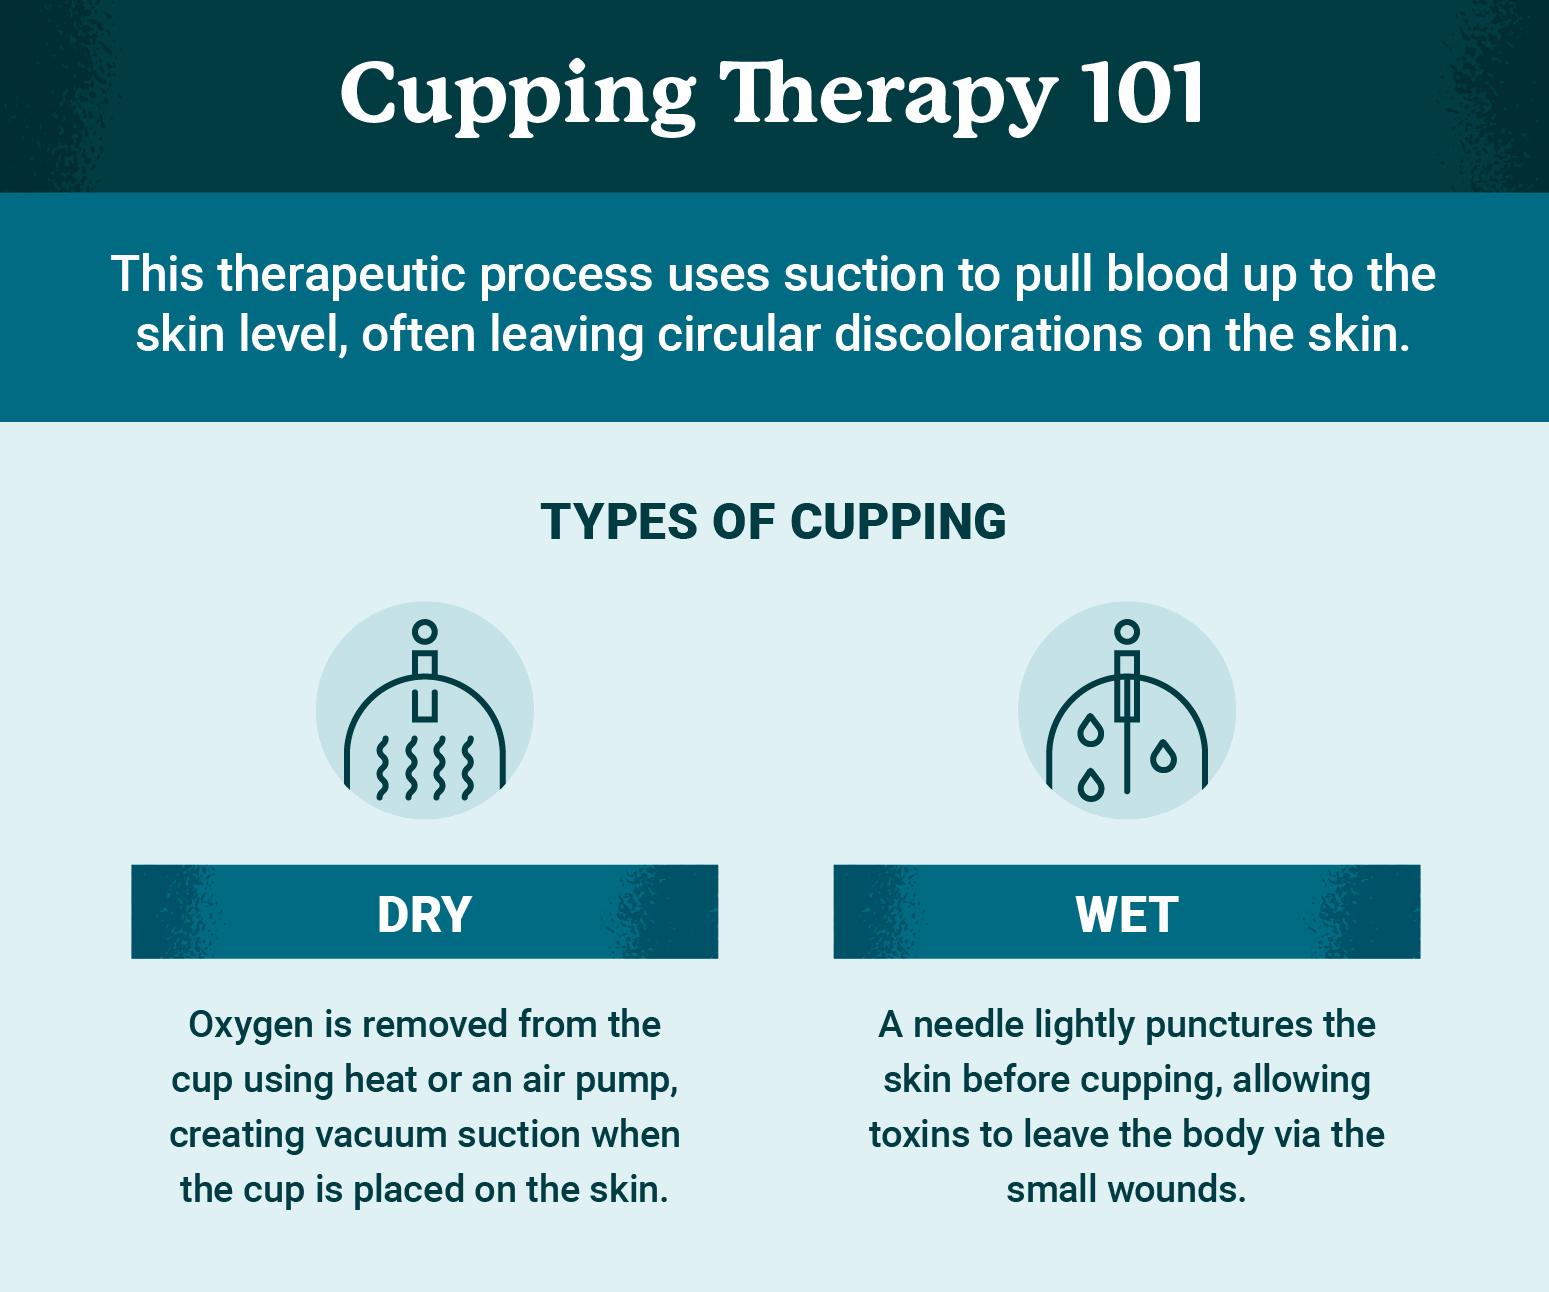 Cupping therapy 101 graphic explains types of cupping